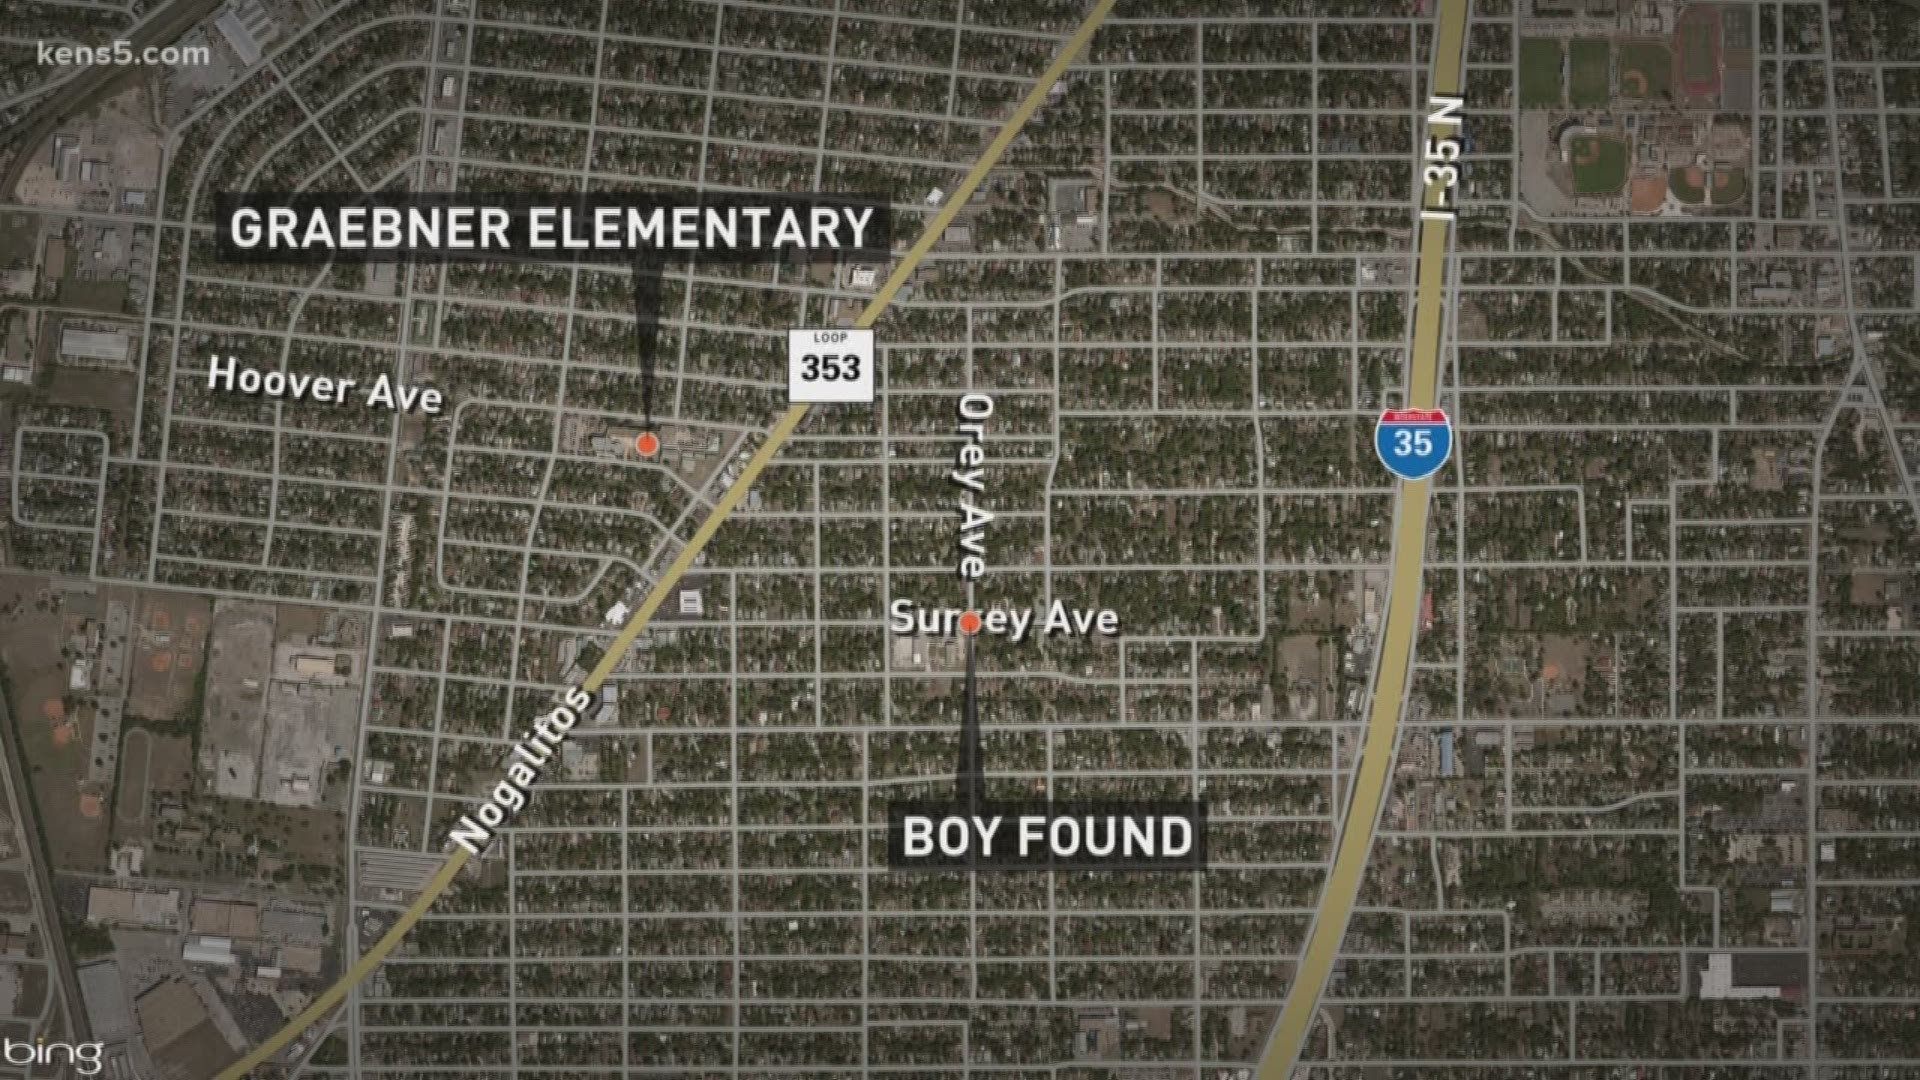 A 9-year-old boy who went missing from the city's southwest side Tuesday afternoon has been found safe just a few miles away from where he was last seen. Eyewitness News reporter Sharon Ko has more.